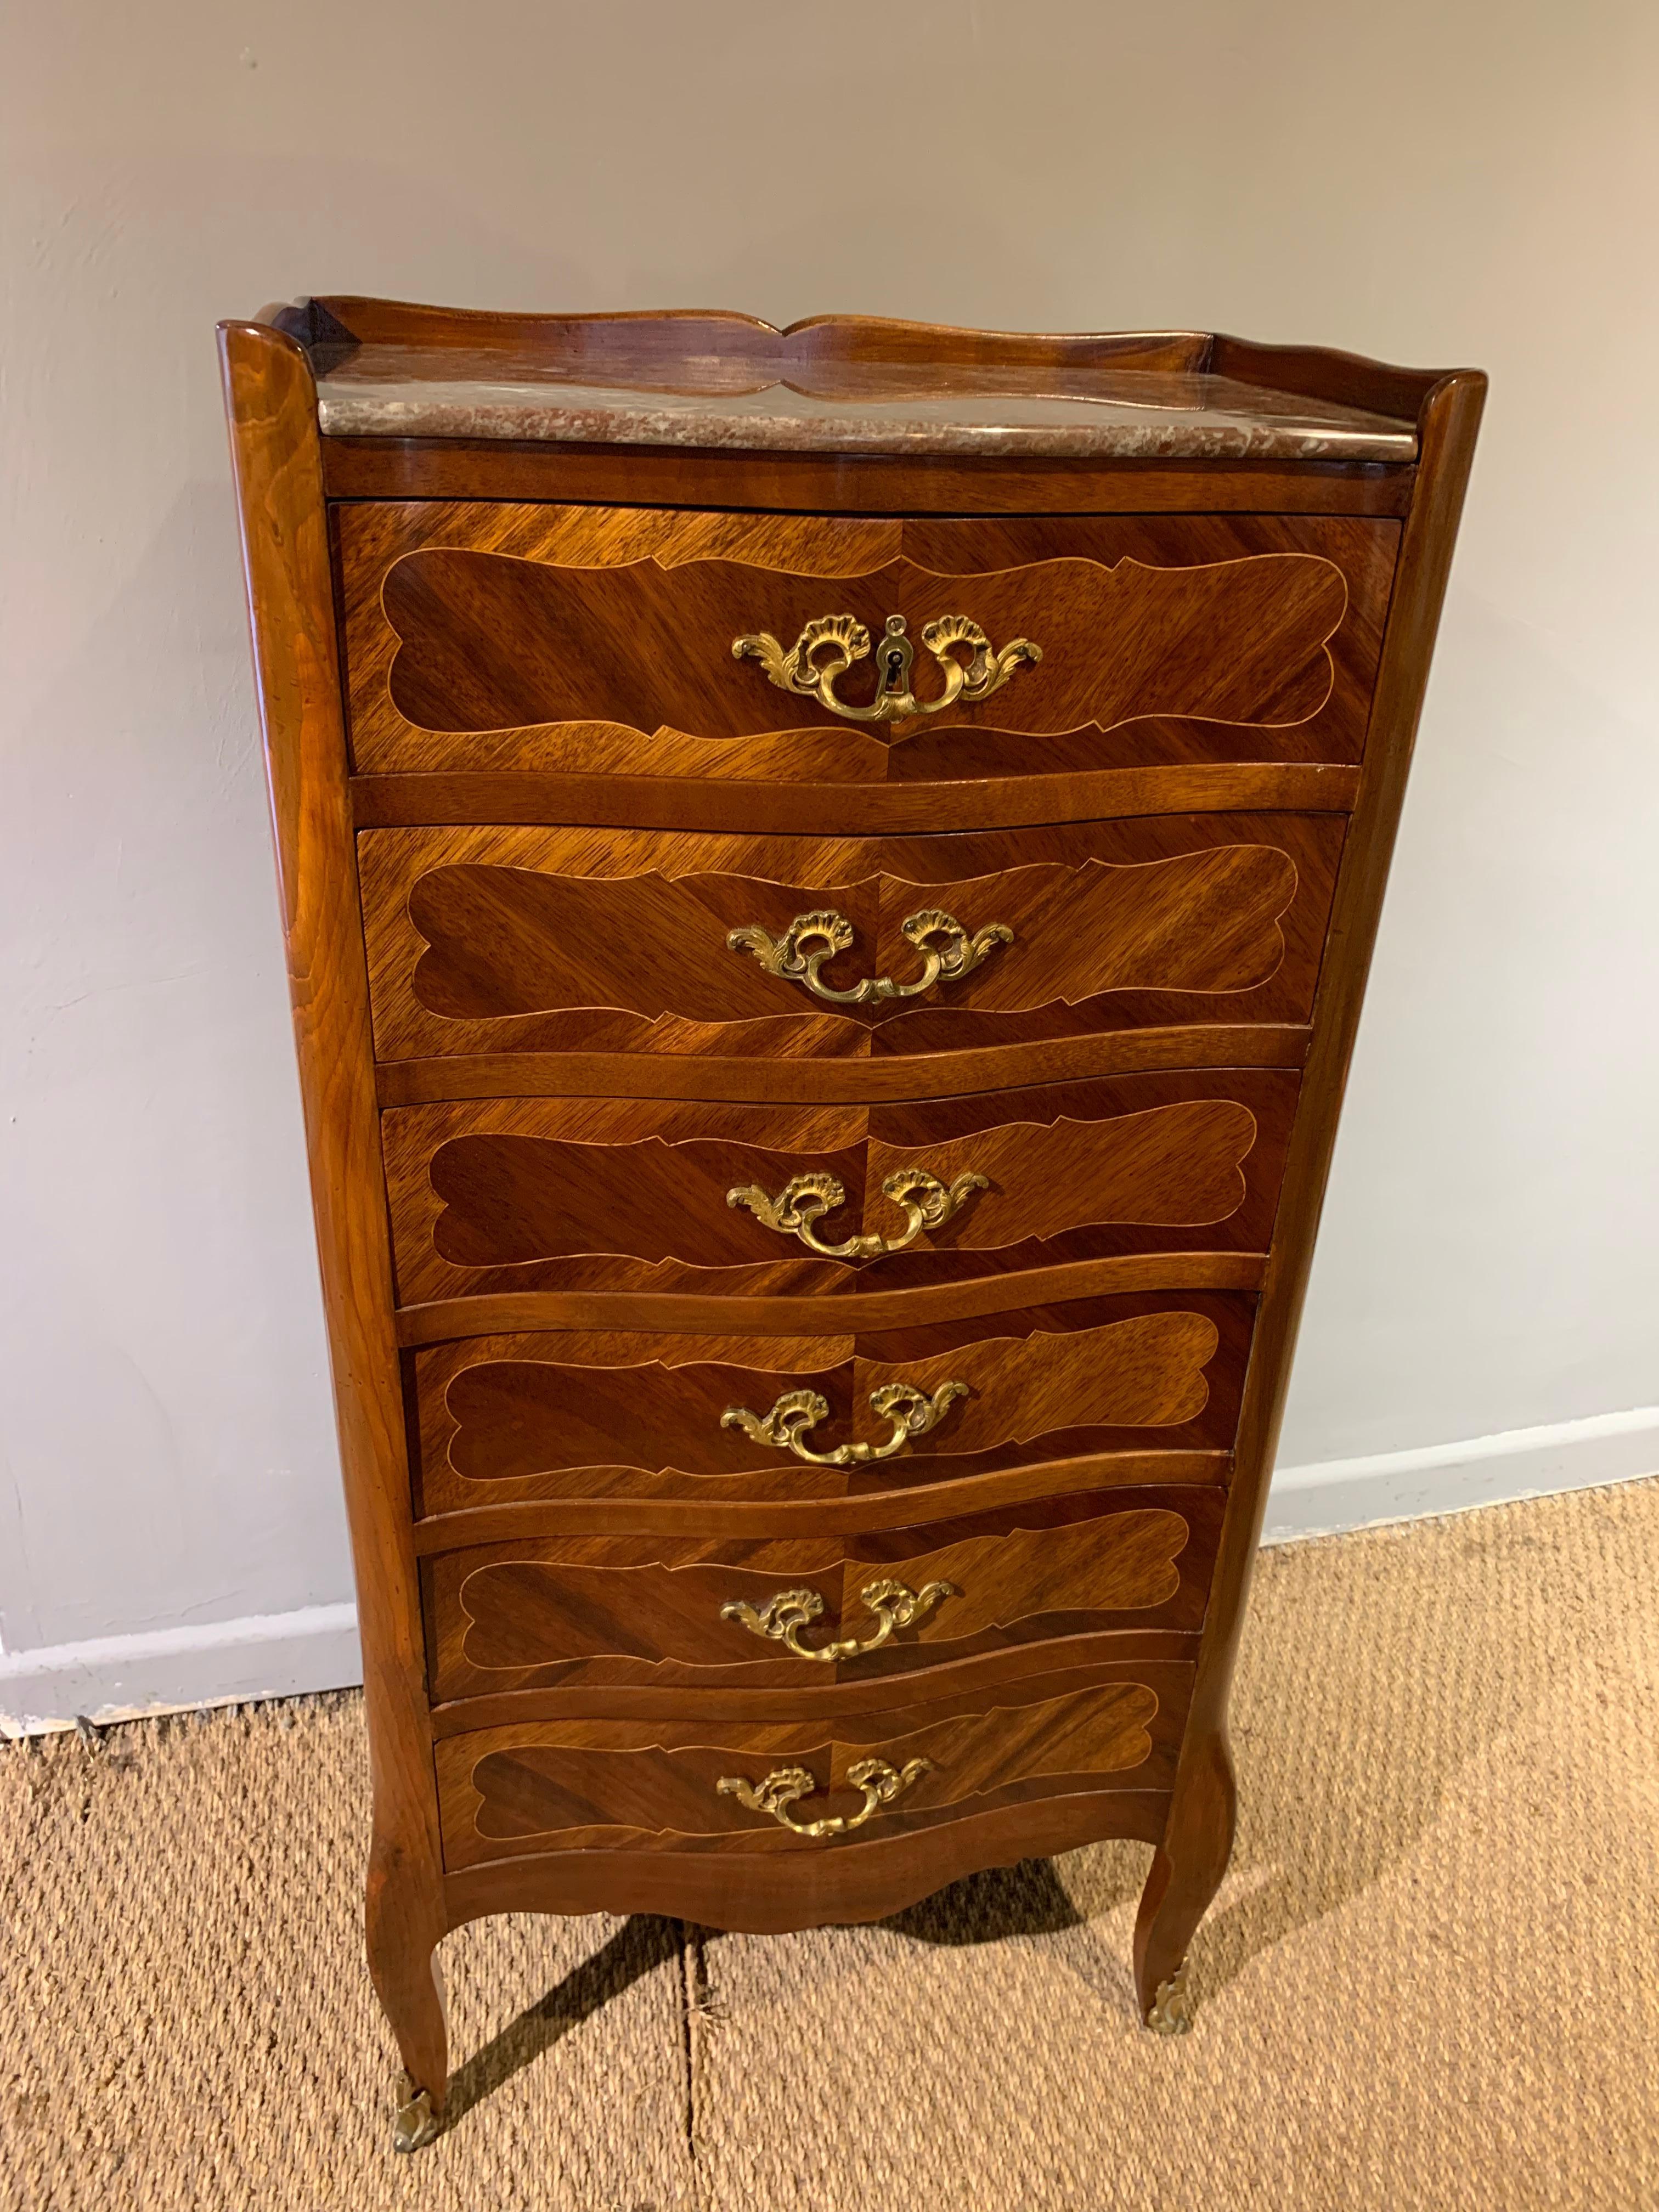 Very charming early 20th century tall and narrow chest of drawers

French dating to circa 1910, with original marble top and ormolu handles

Presented in top showroom condition having been through our workshops cleaned and polished ready to be